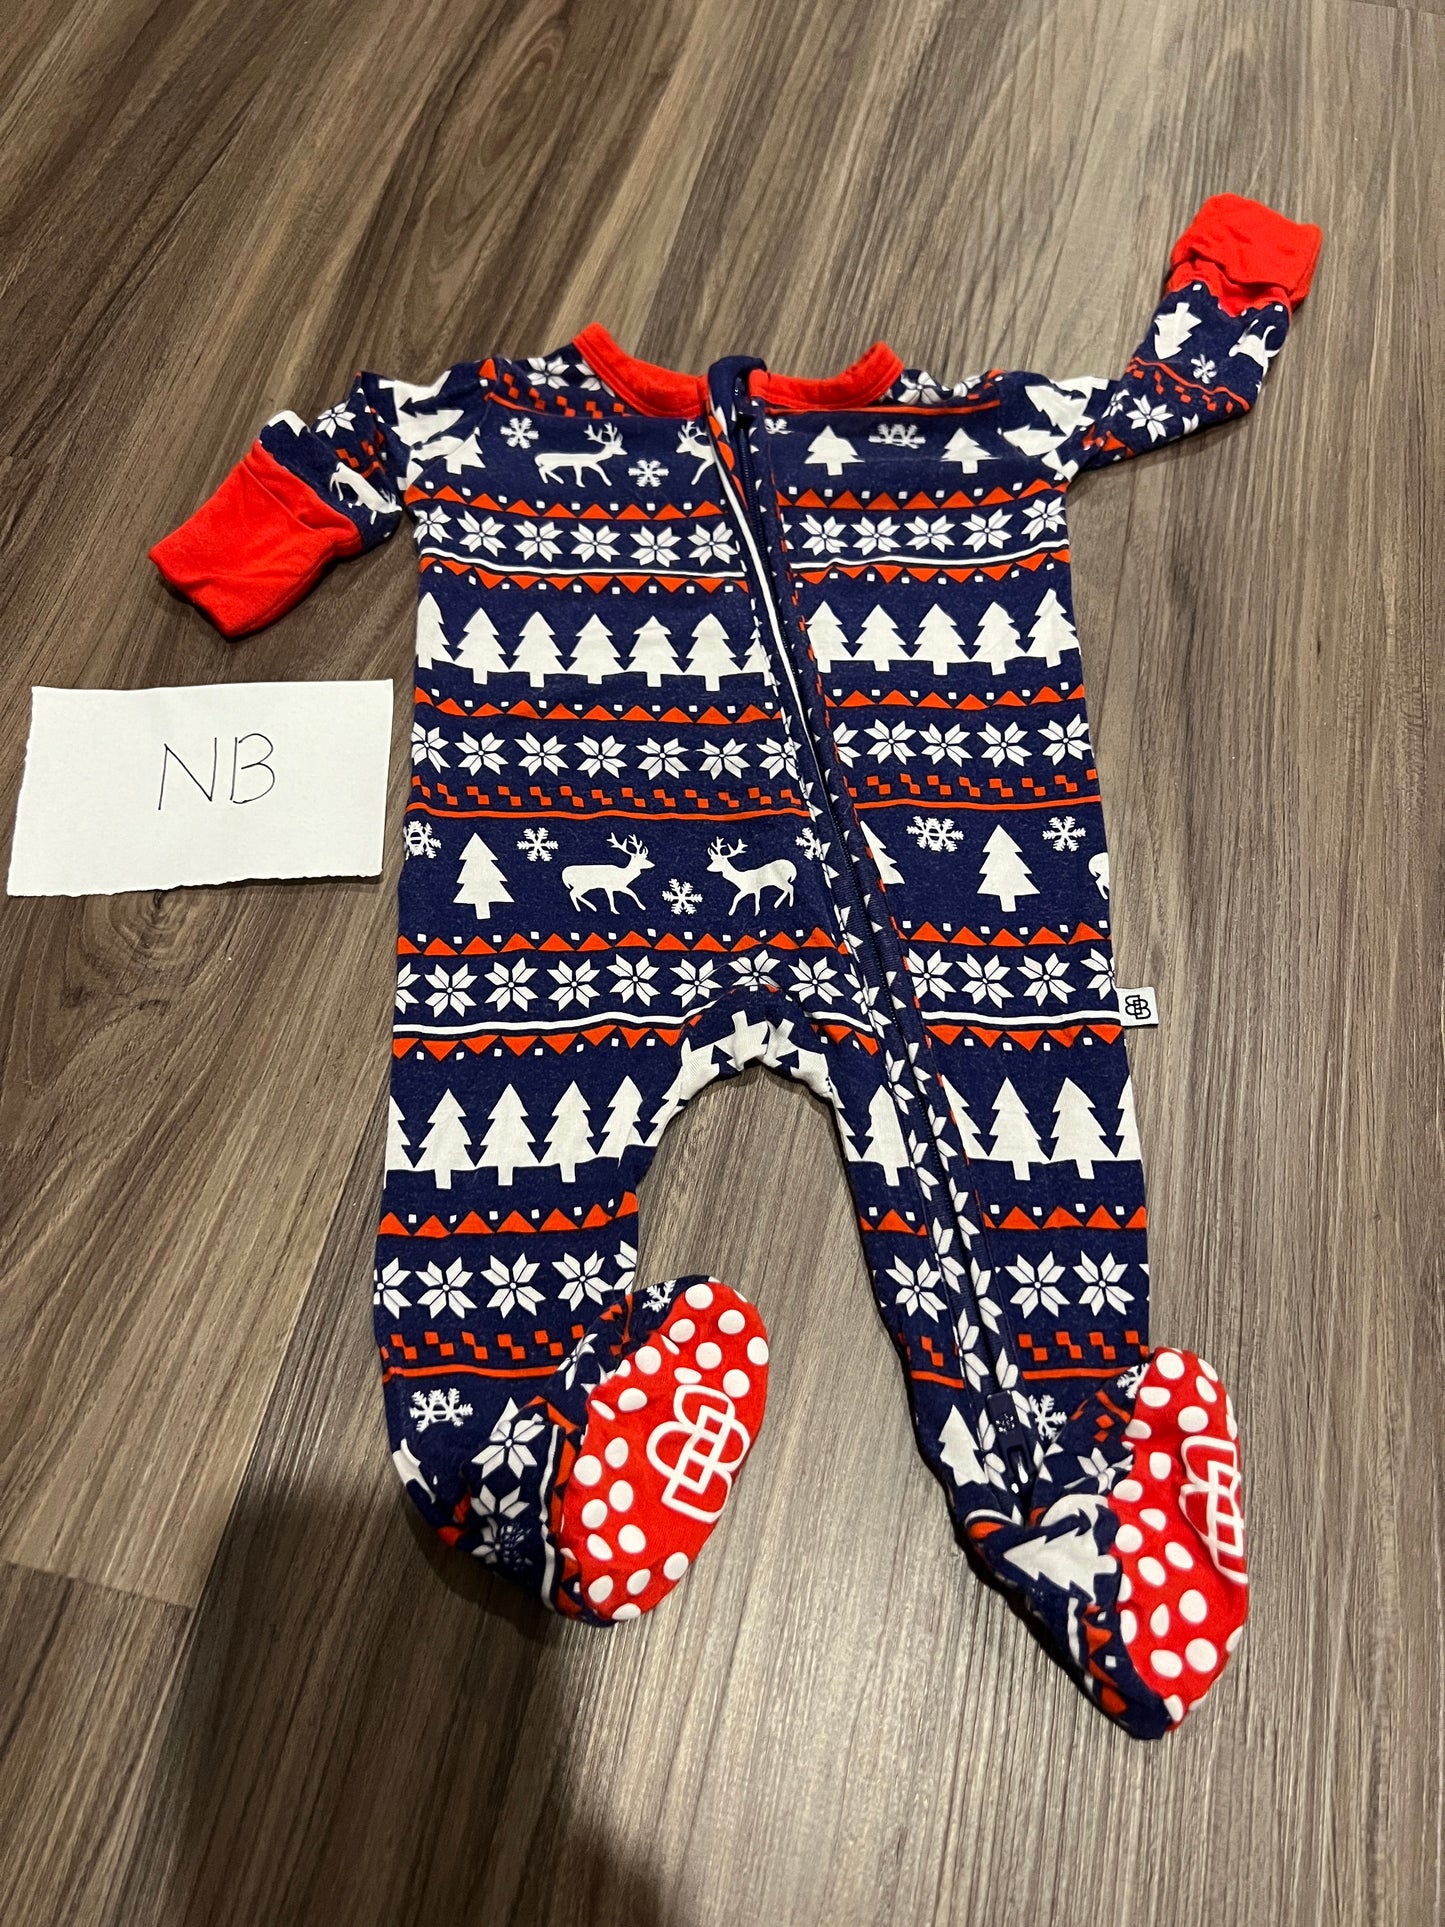 NB - Bums & Roses - Christmas Zippy - PU 45236 Except Semiannual Sale